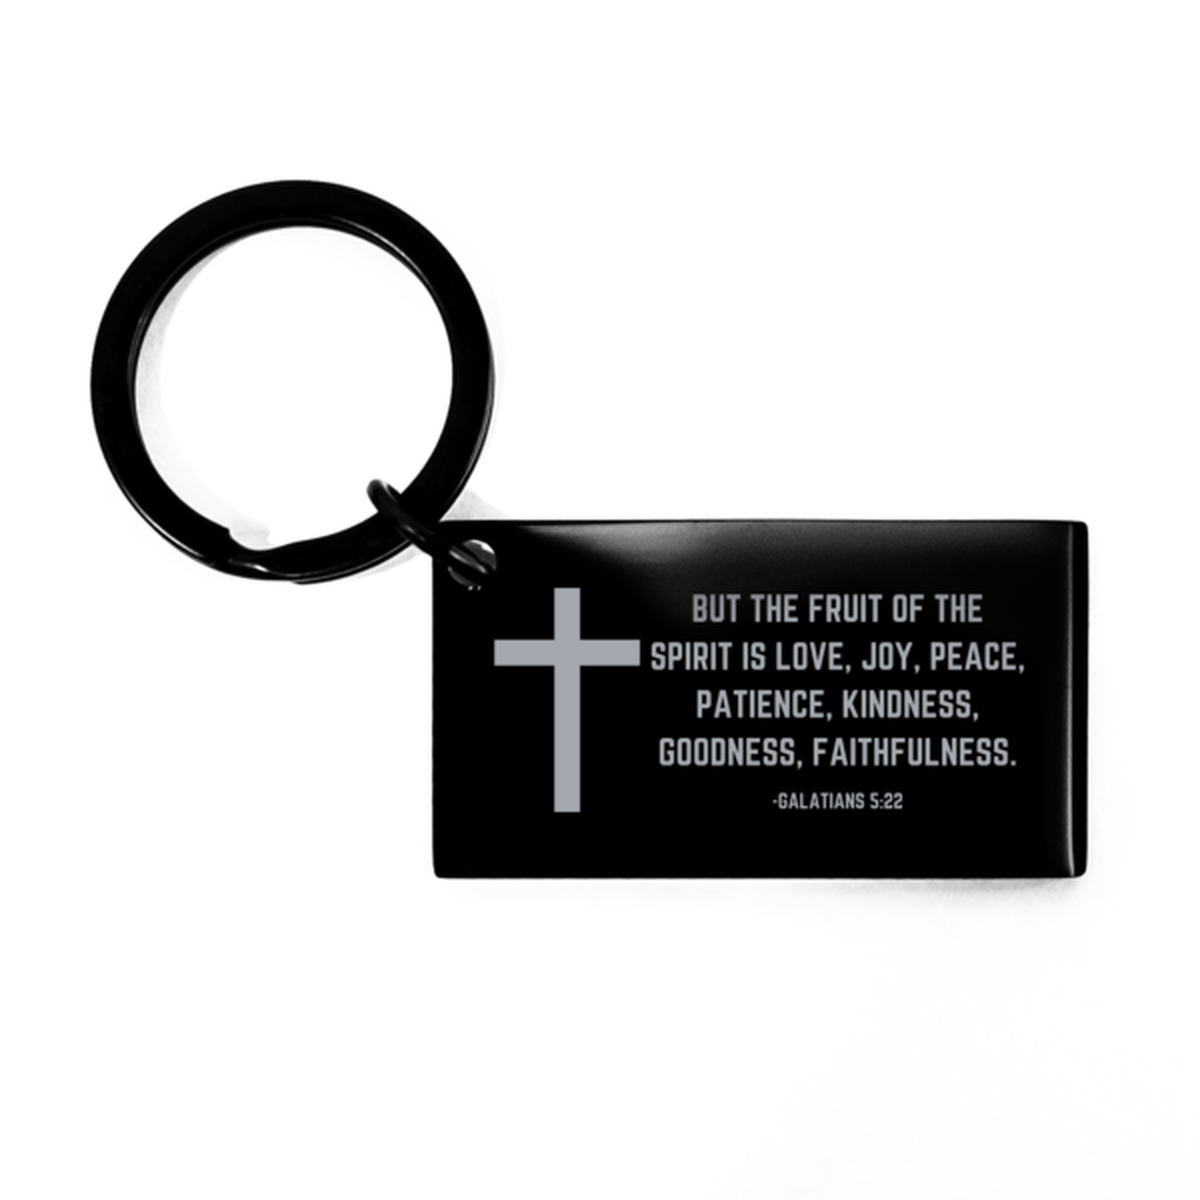 Baptism Gifts For Teenage Boys Girls, Christian Bible Verse Black Keychain, But the fruit of the Spirit, Confirmation Gifts, Bible Verse Keyring for Son, Godson, Grandson, Nephew